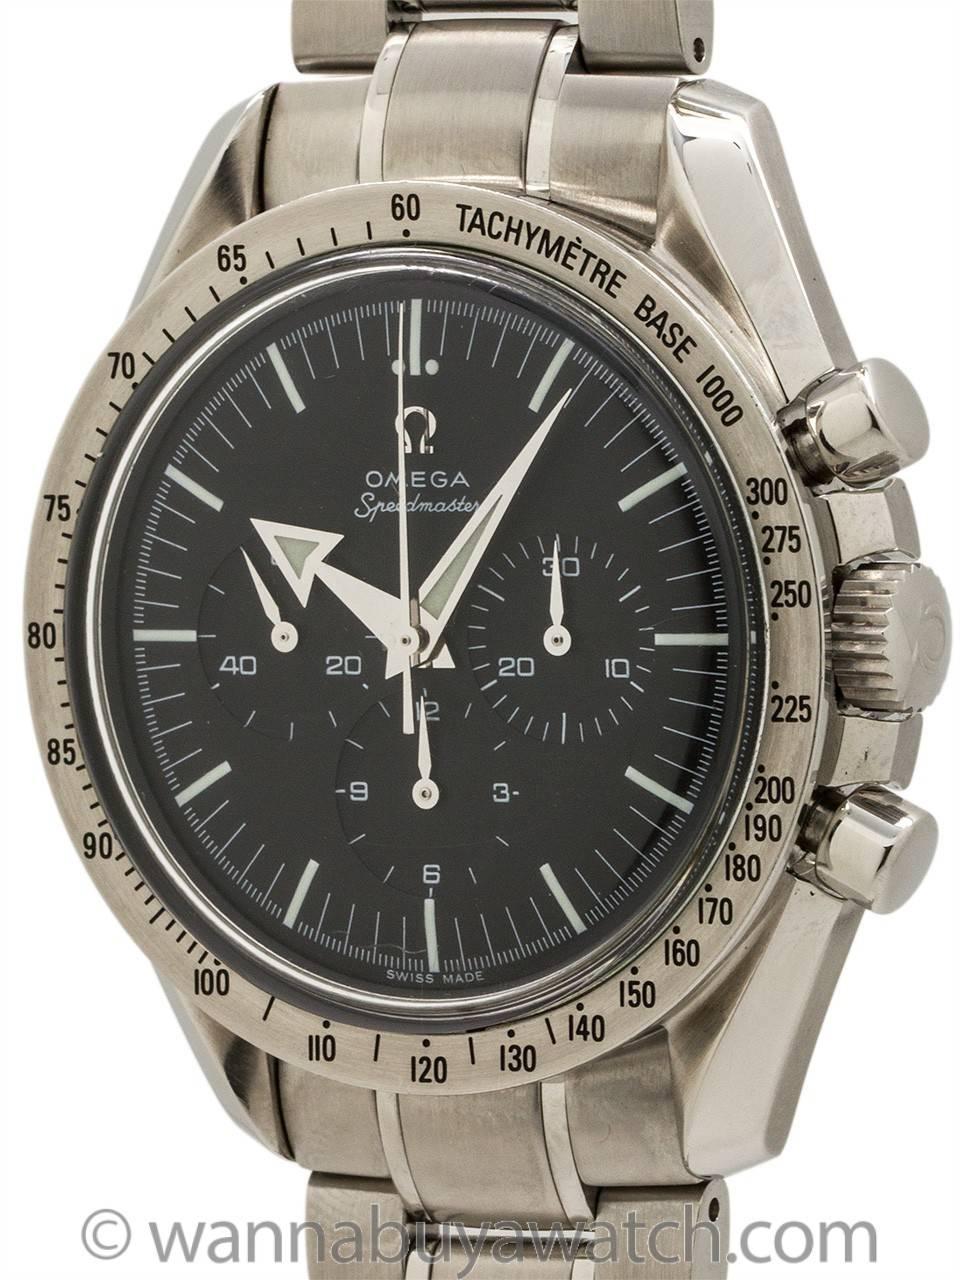 Speedmaster “Broadarrow” reissue case ref# 3594.50 circa 1985, manual wind reissue of the original 1957 model. Featuring 42 x 47mm case with screw down back and wide brushed finish tachymetre bezel. Original black dial with applied Omega logo